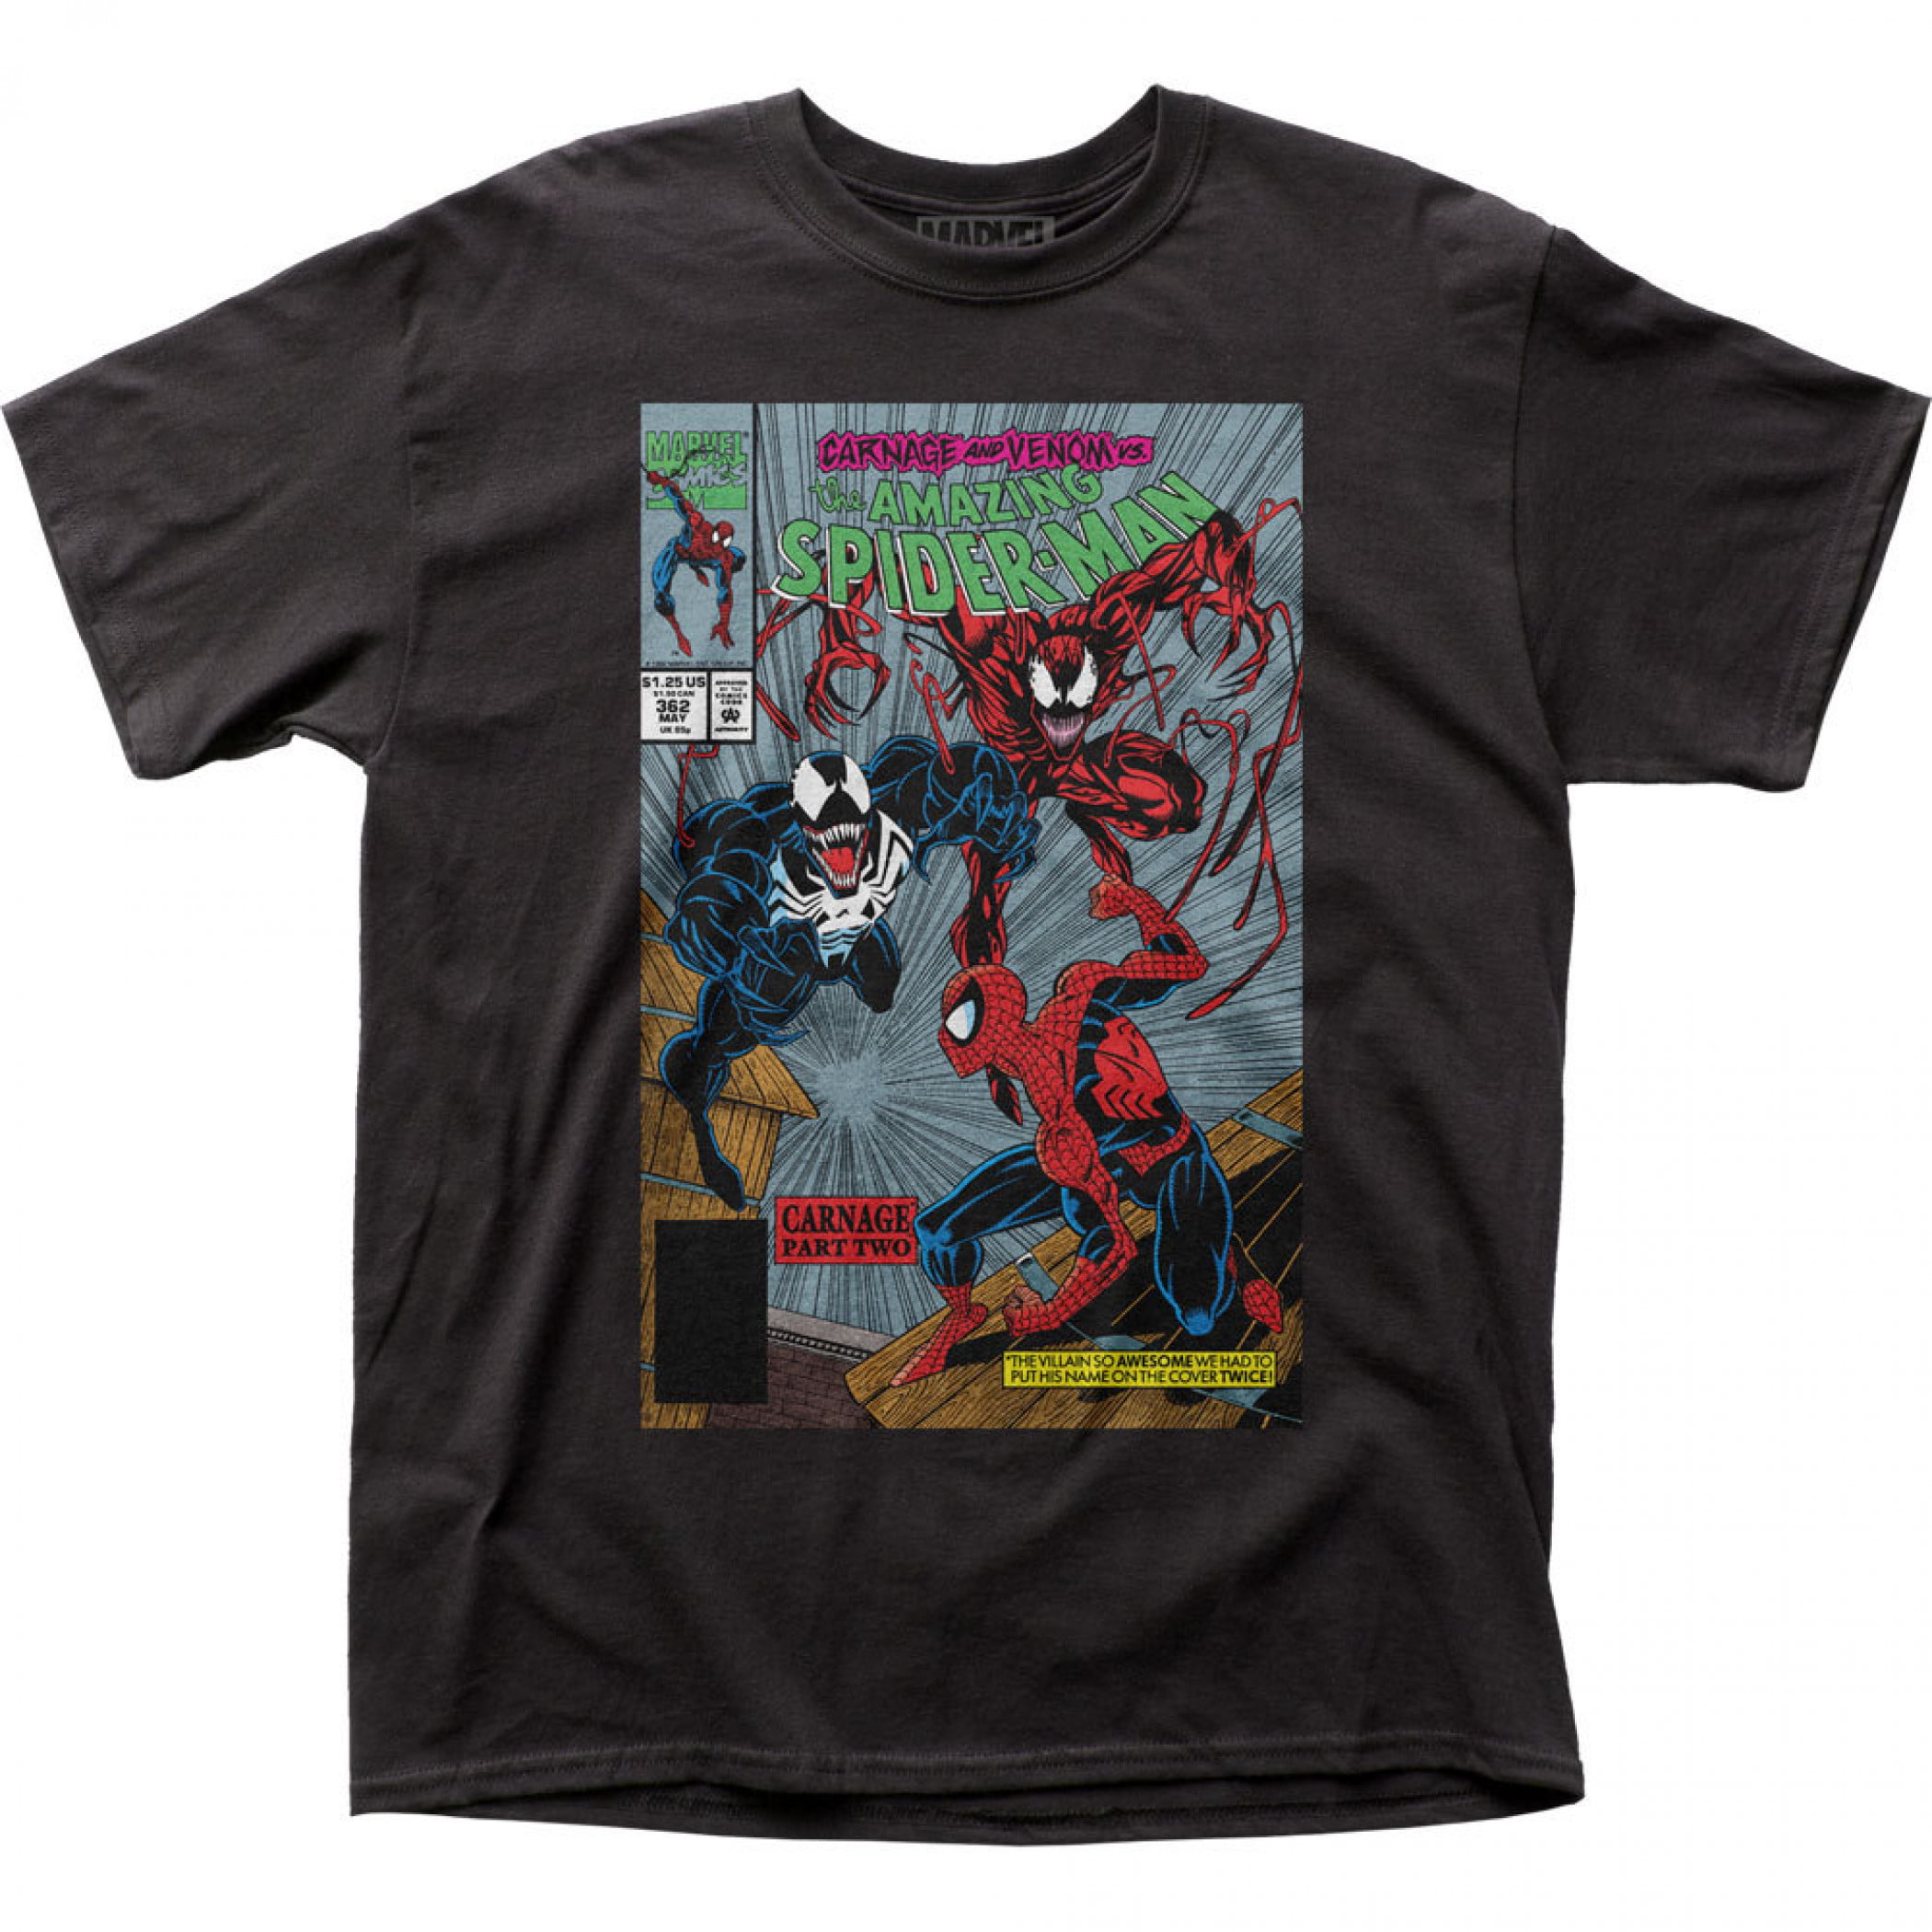 Spider-Man Venom vs Carnage Comic Cover Part Two T-Shirt-Small 